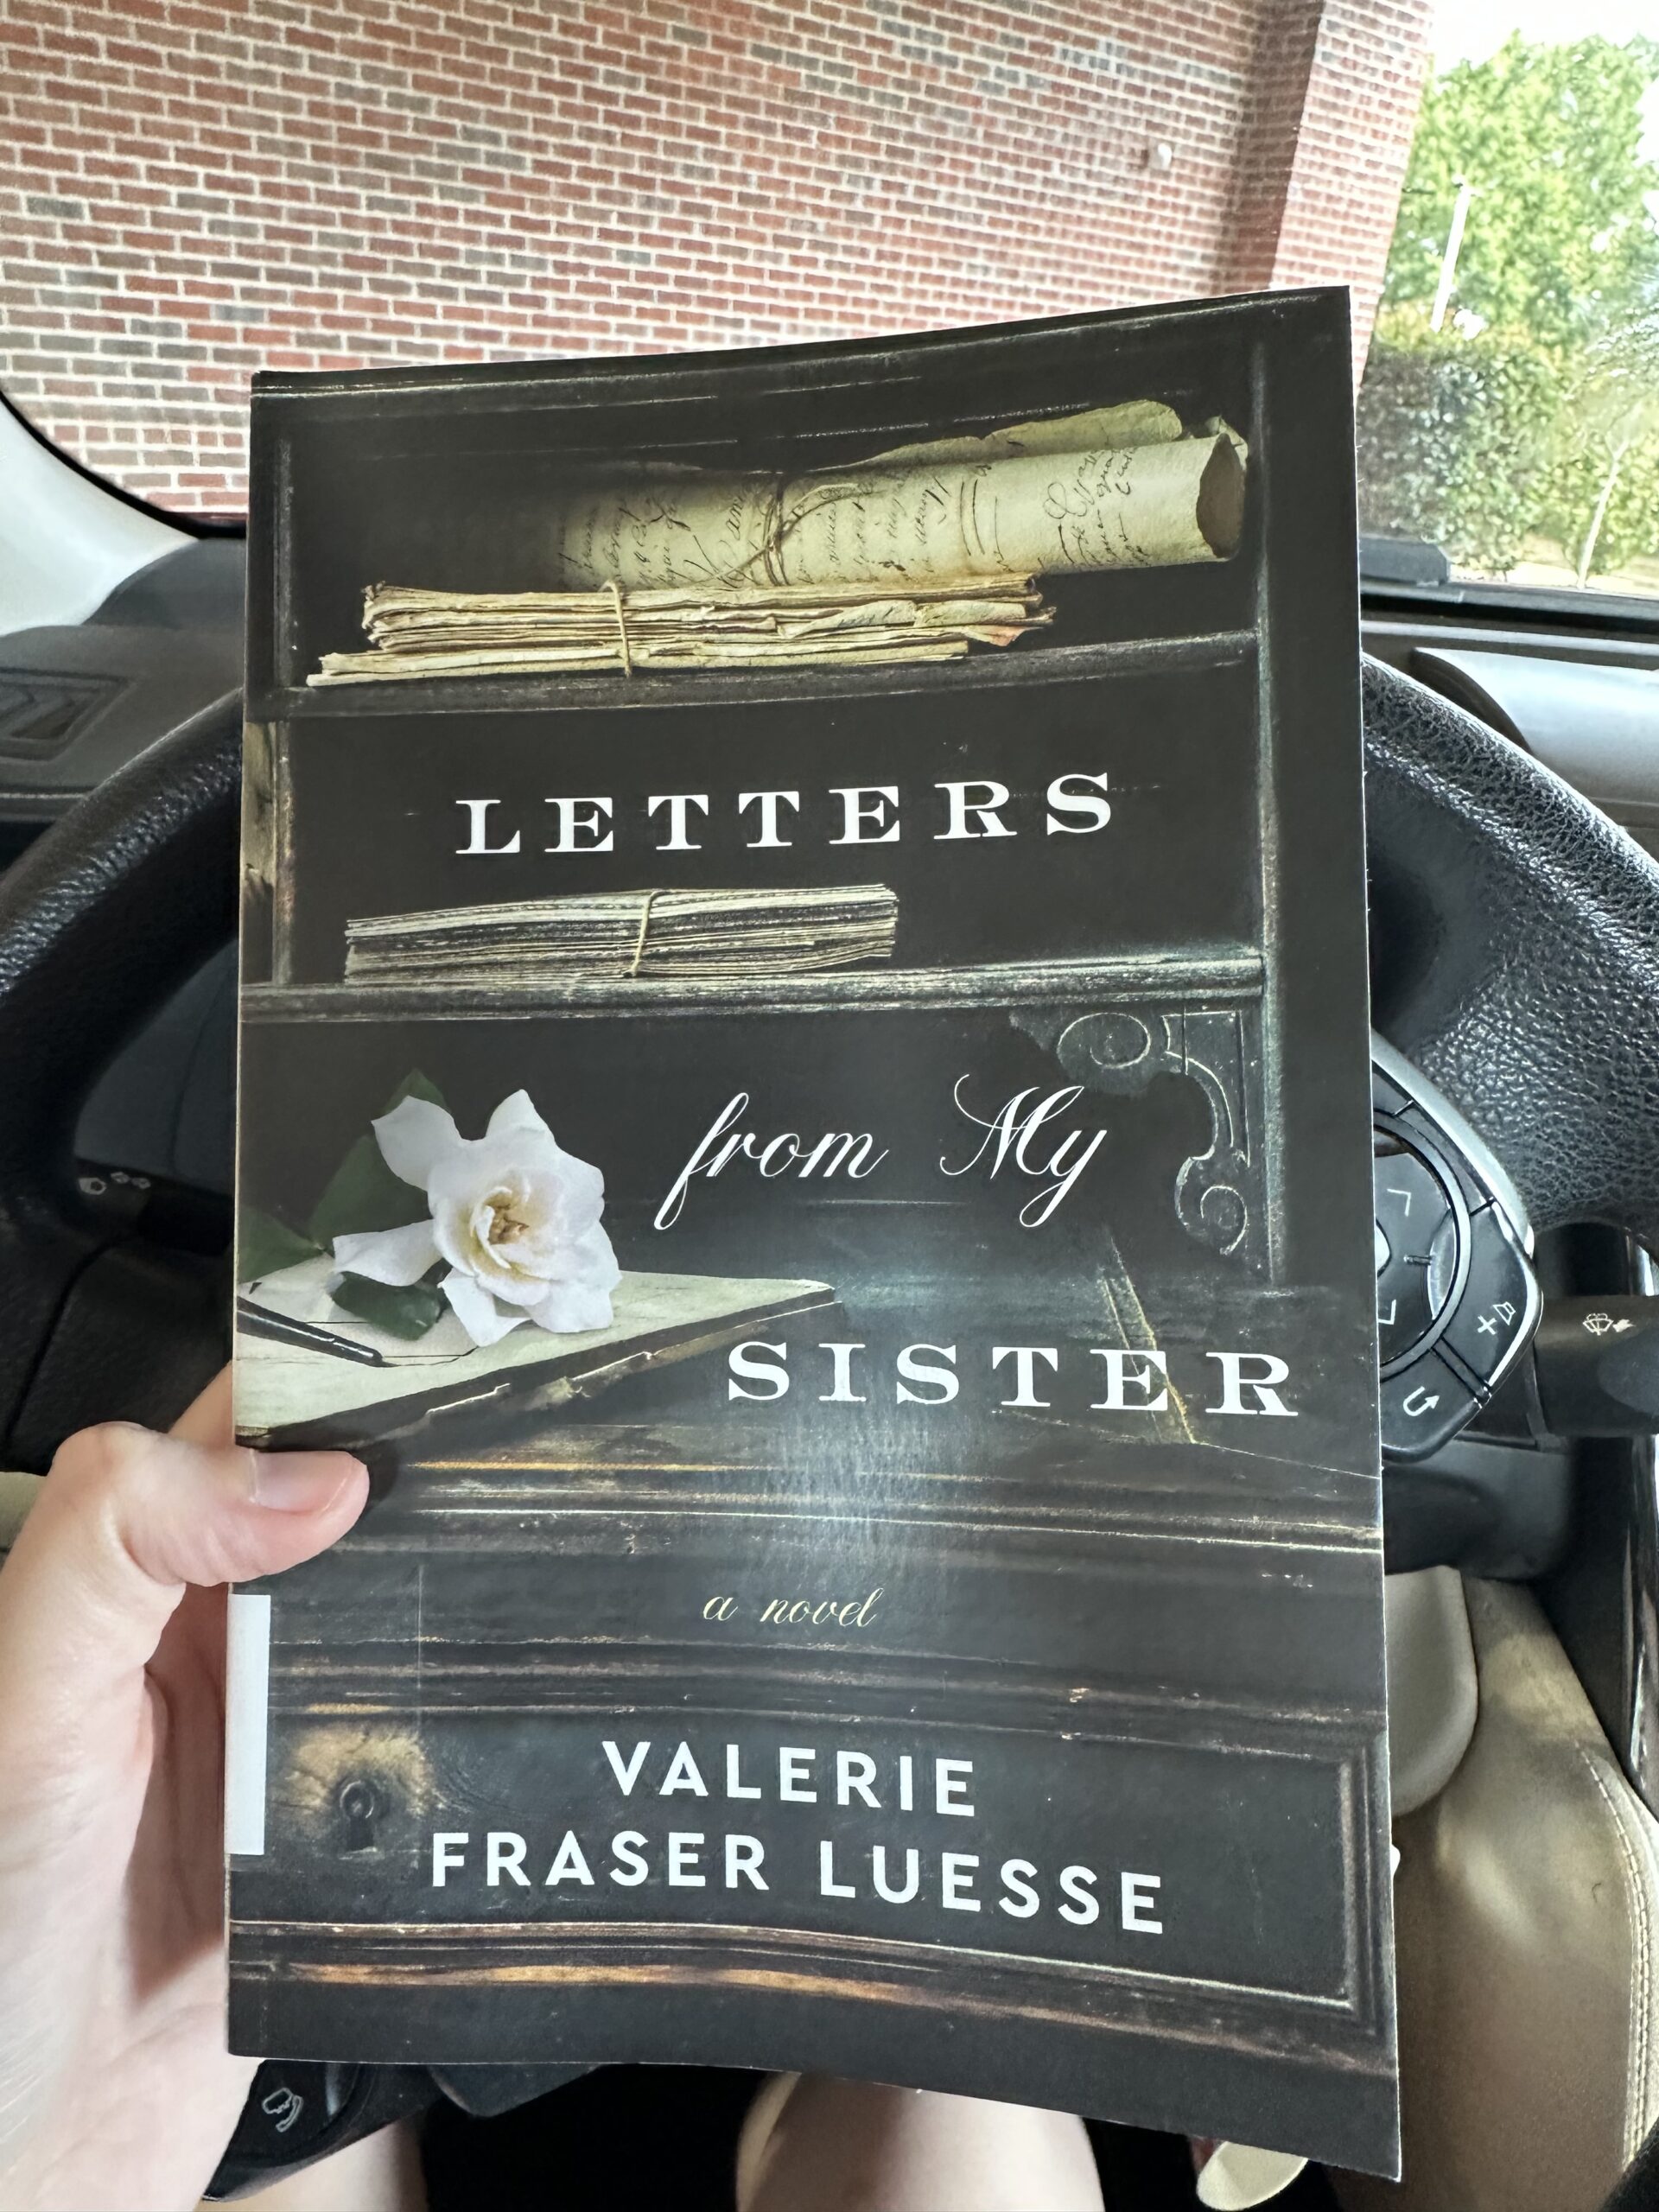 Letters from My Sister